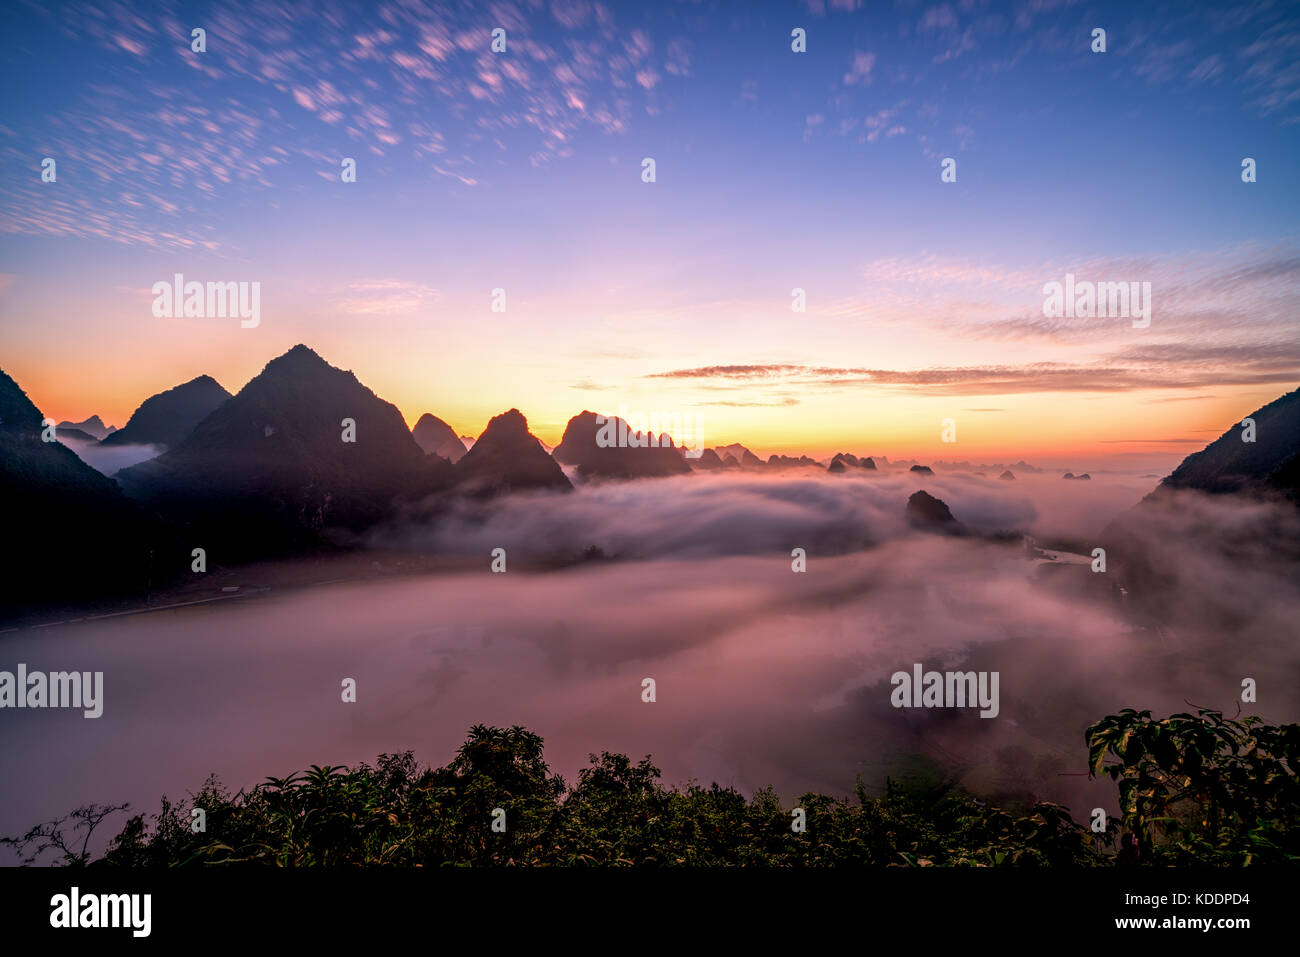 Royalty high quality free stock image of dawn and fog, mountains, river and rice field at Trung Khanh town, Cao Bang province, Vietnam. Stock Photo